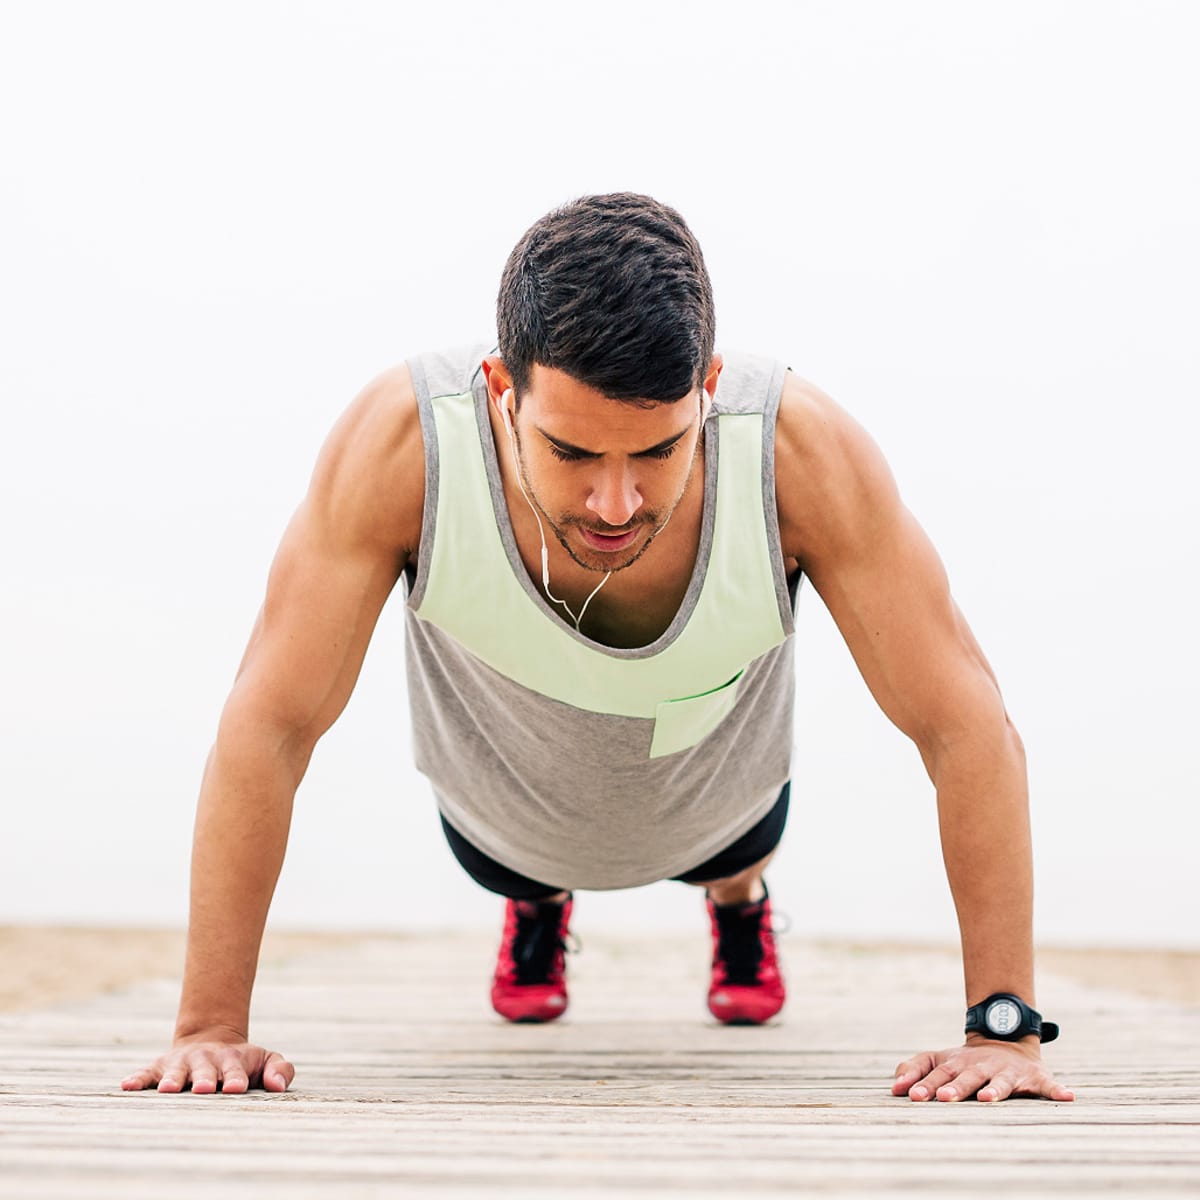 Doing Push-ups Is Great, but Here's What You Should Do to Balance It Out